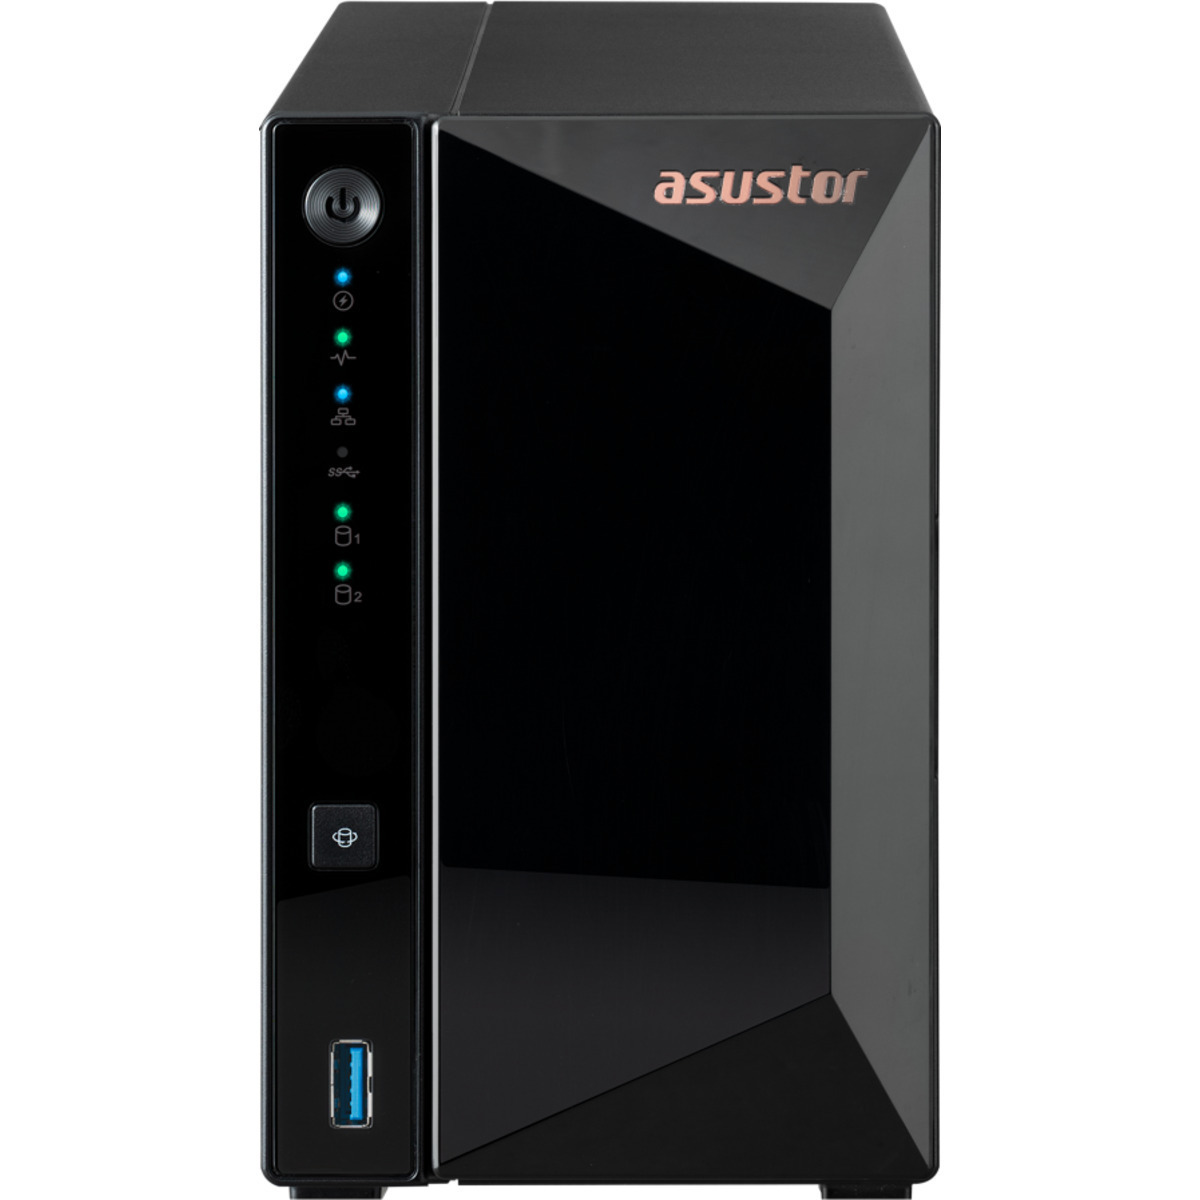 ASUSTOR DRIVESTOR 2 Pro AS3302T 4tb 2-Bay Desktop Personal / Basic Home / Small Office NAS - Network Attached Storage Device 2x2tb Sandisk Ultra 3D SDSSDH3-2T00 2.5 560/520MB/s SATA 6Gb/s SSD CONSUMER Class Drives Installed - Burn-In Tested DRIVESTOR 2 Pro AS3302T